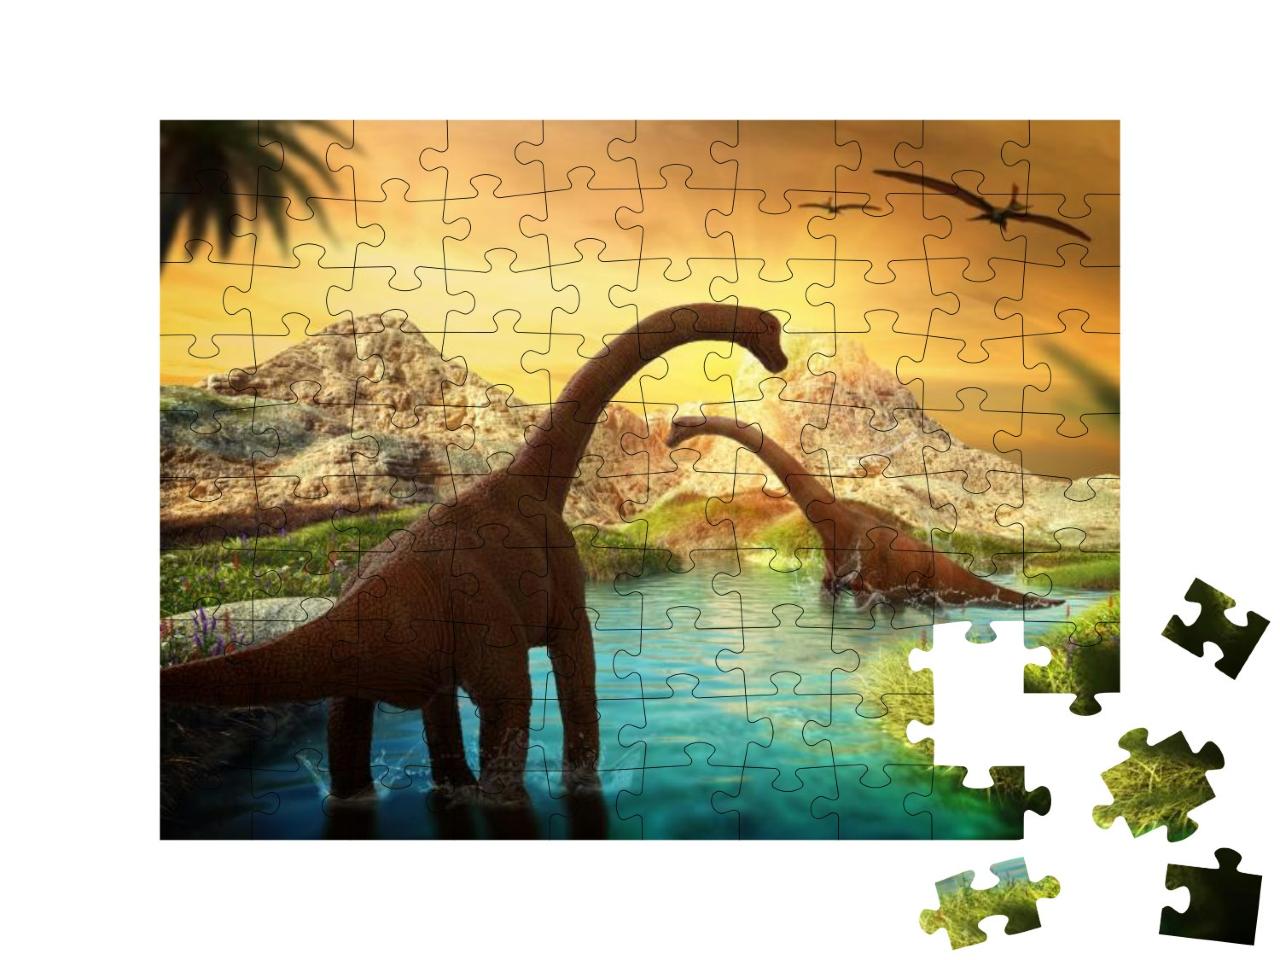 3D Fantasy Landscape with Dinosaur, 3D Rendered Landscape... Jigsaw Puzzle with 100 pieces